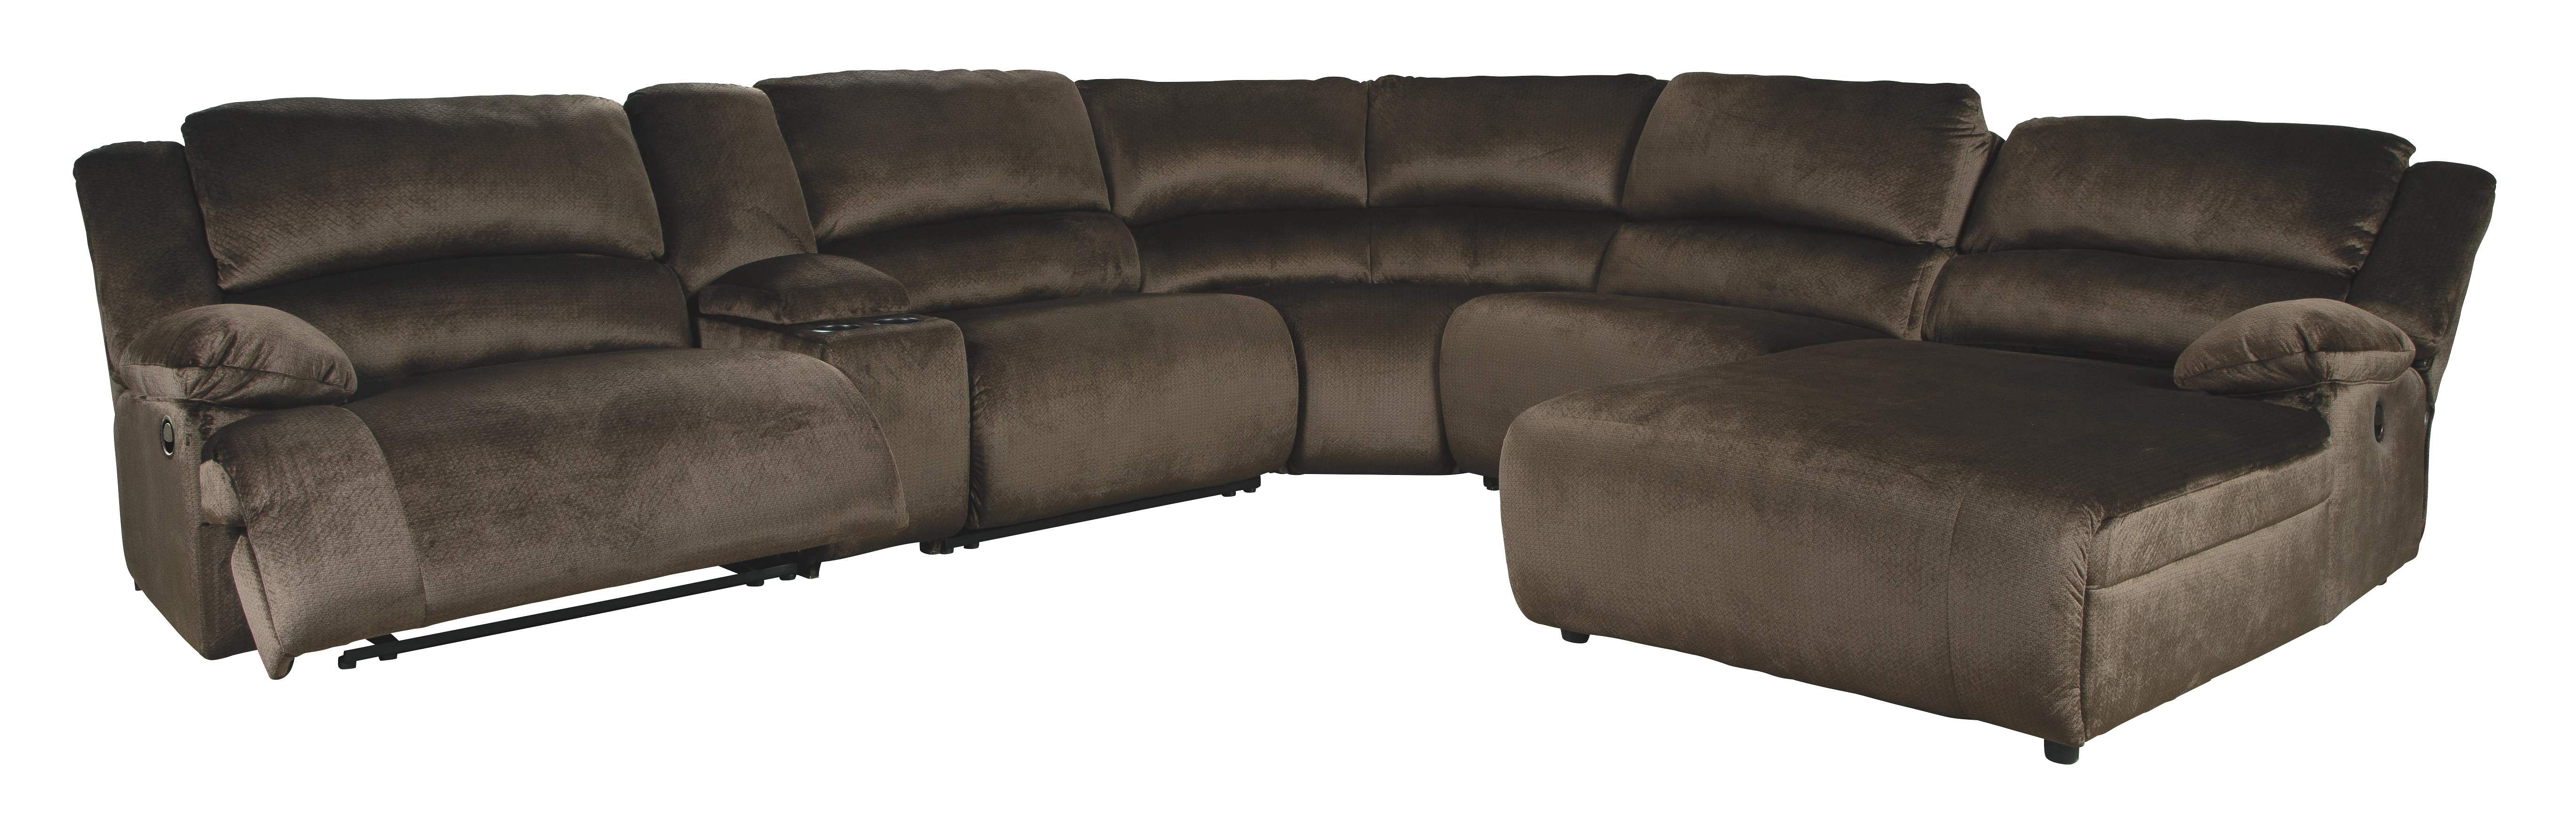 https://istylenew.gumlet.io/images/products/ashley-furniture-36504-40-57-19-77-46-07-clonmel-chocolate-zero-wall-reclinersole-with-storage-recliner-wedge-chair-press-back-chaise_1.jpg